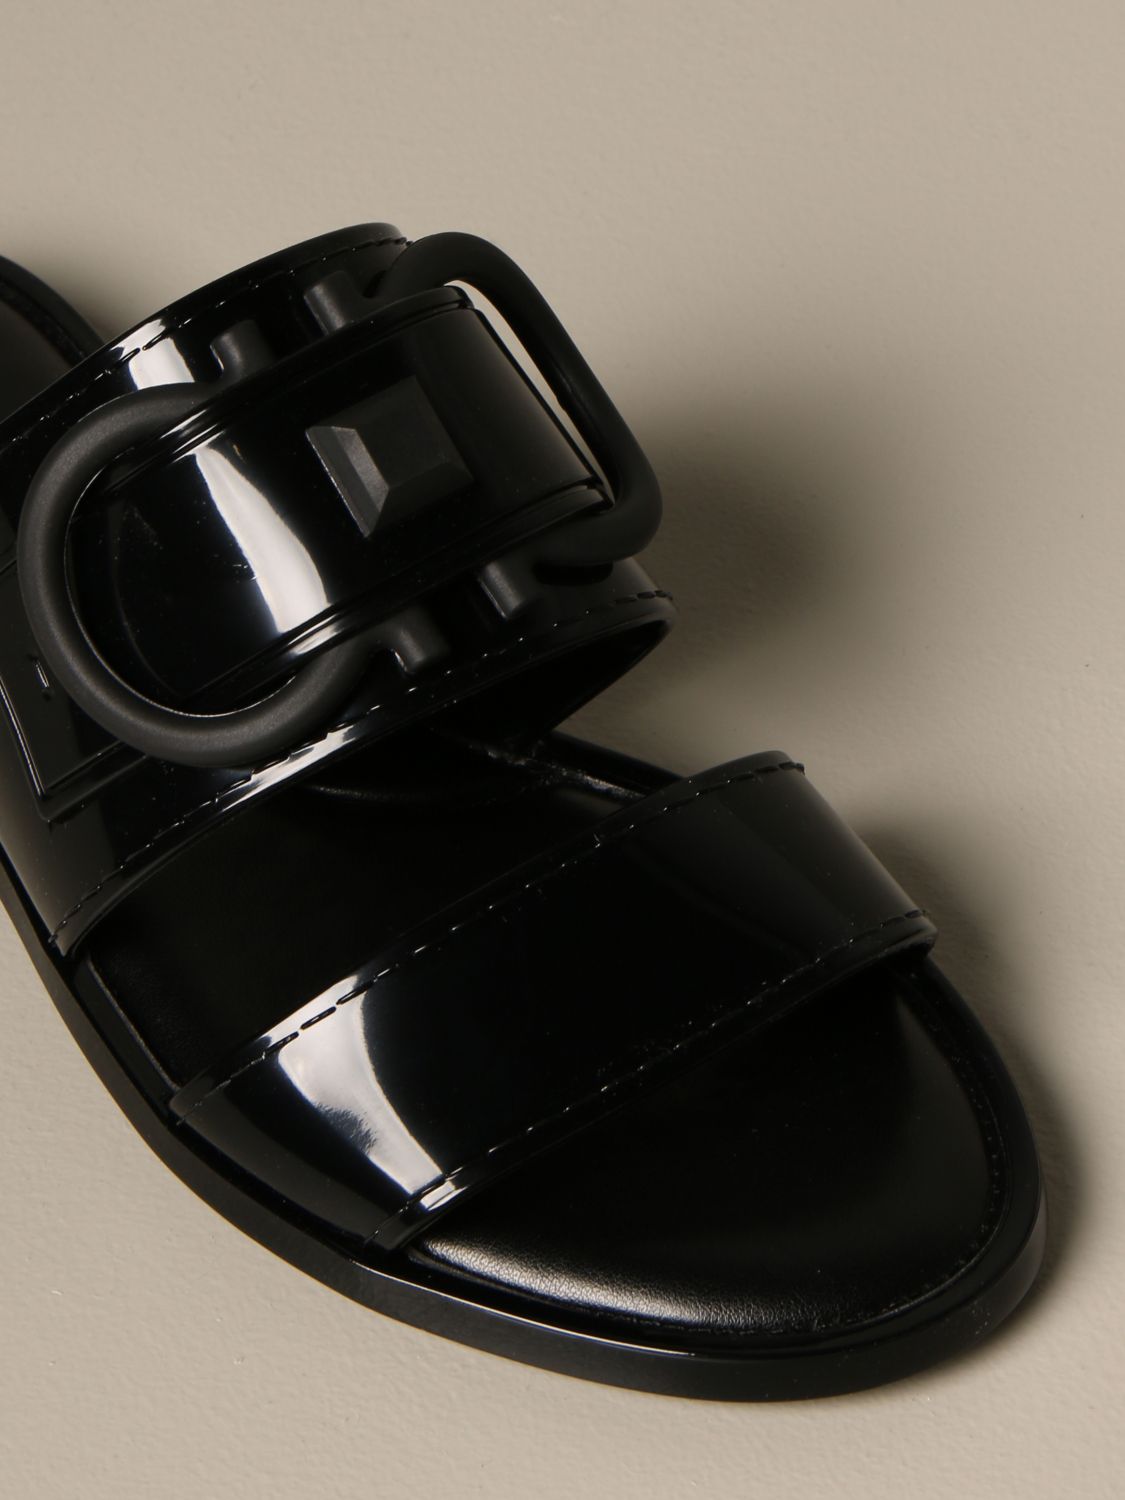 Taryn sandal with double bands with Mediterranean hook